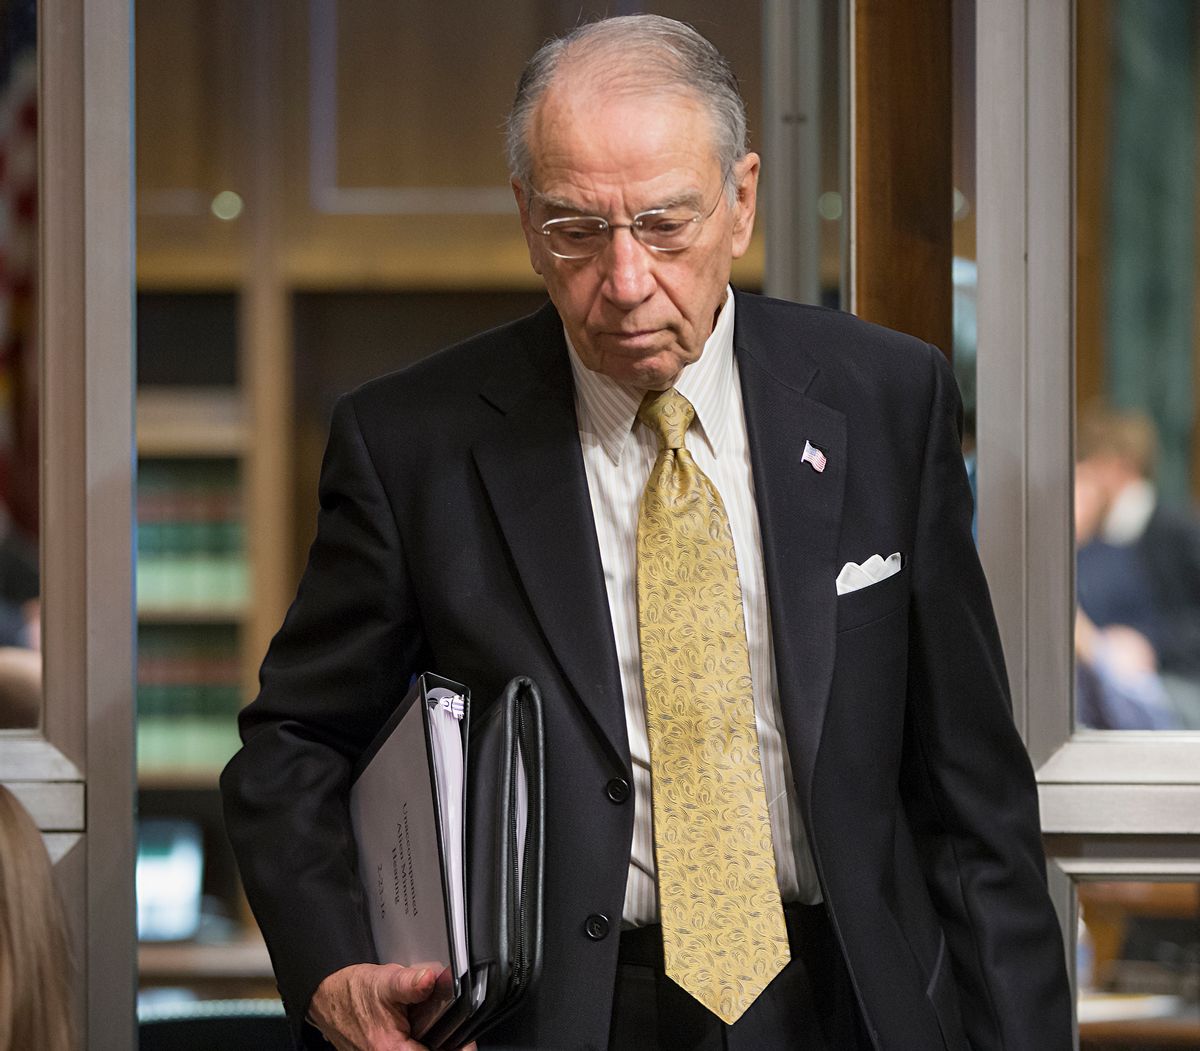 Senate Judiciary Committee Chairman Sen. Chuck Grassley, R-Iowa arrives for a committee hearing on Capitol Hill in Washington, Tuesday, Feb. 23, 2016. Senate Republicans, most vocally Majority Leader Mitch McConnell, are facing a high-stakes political showdown with President Barack Obama sparked by the recent death of Supreme Court Justice Antonin Scalia. Republicans controlling the Senate  which must confirm any Obama appointee before the individual is seated on the court  say that the decision is too important to be determined by a lame-duck president. (AP Photo/J. Scott Applewhite) (AP)